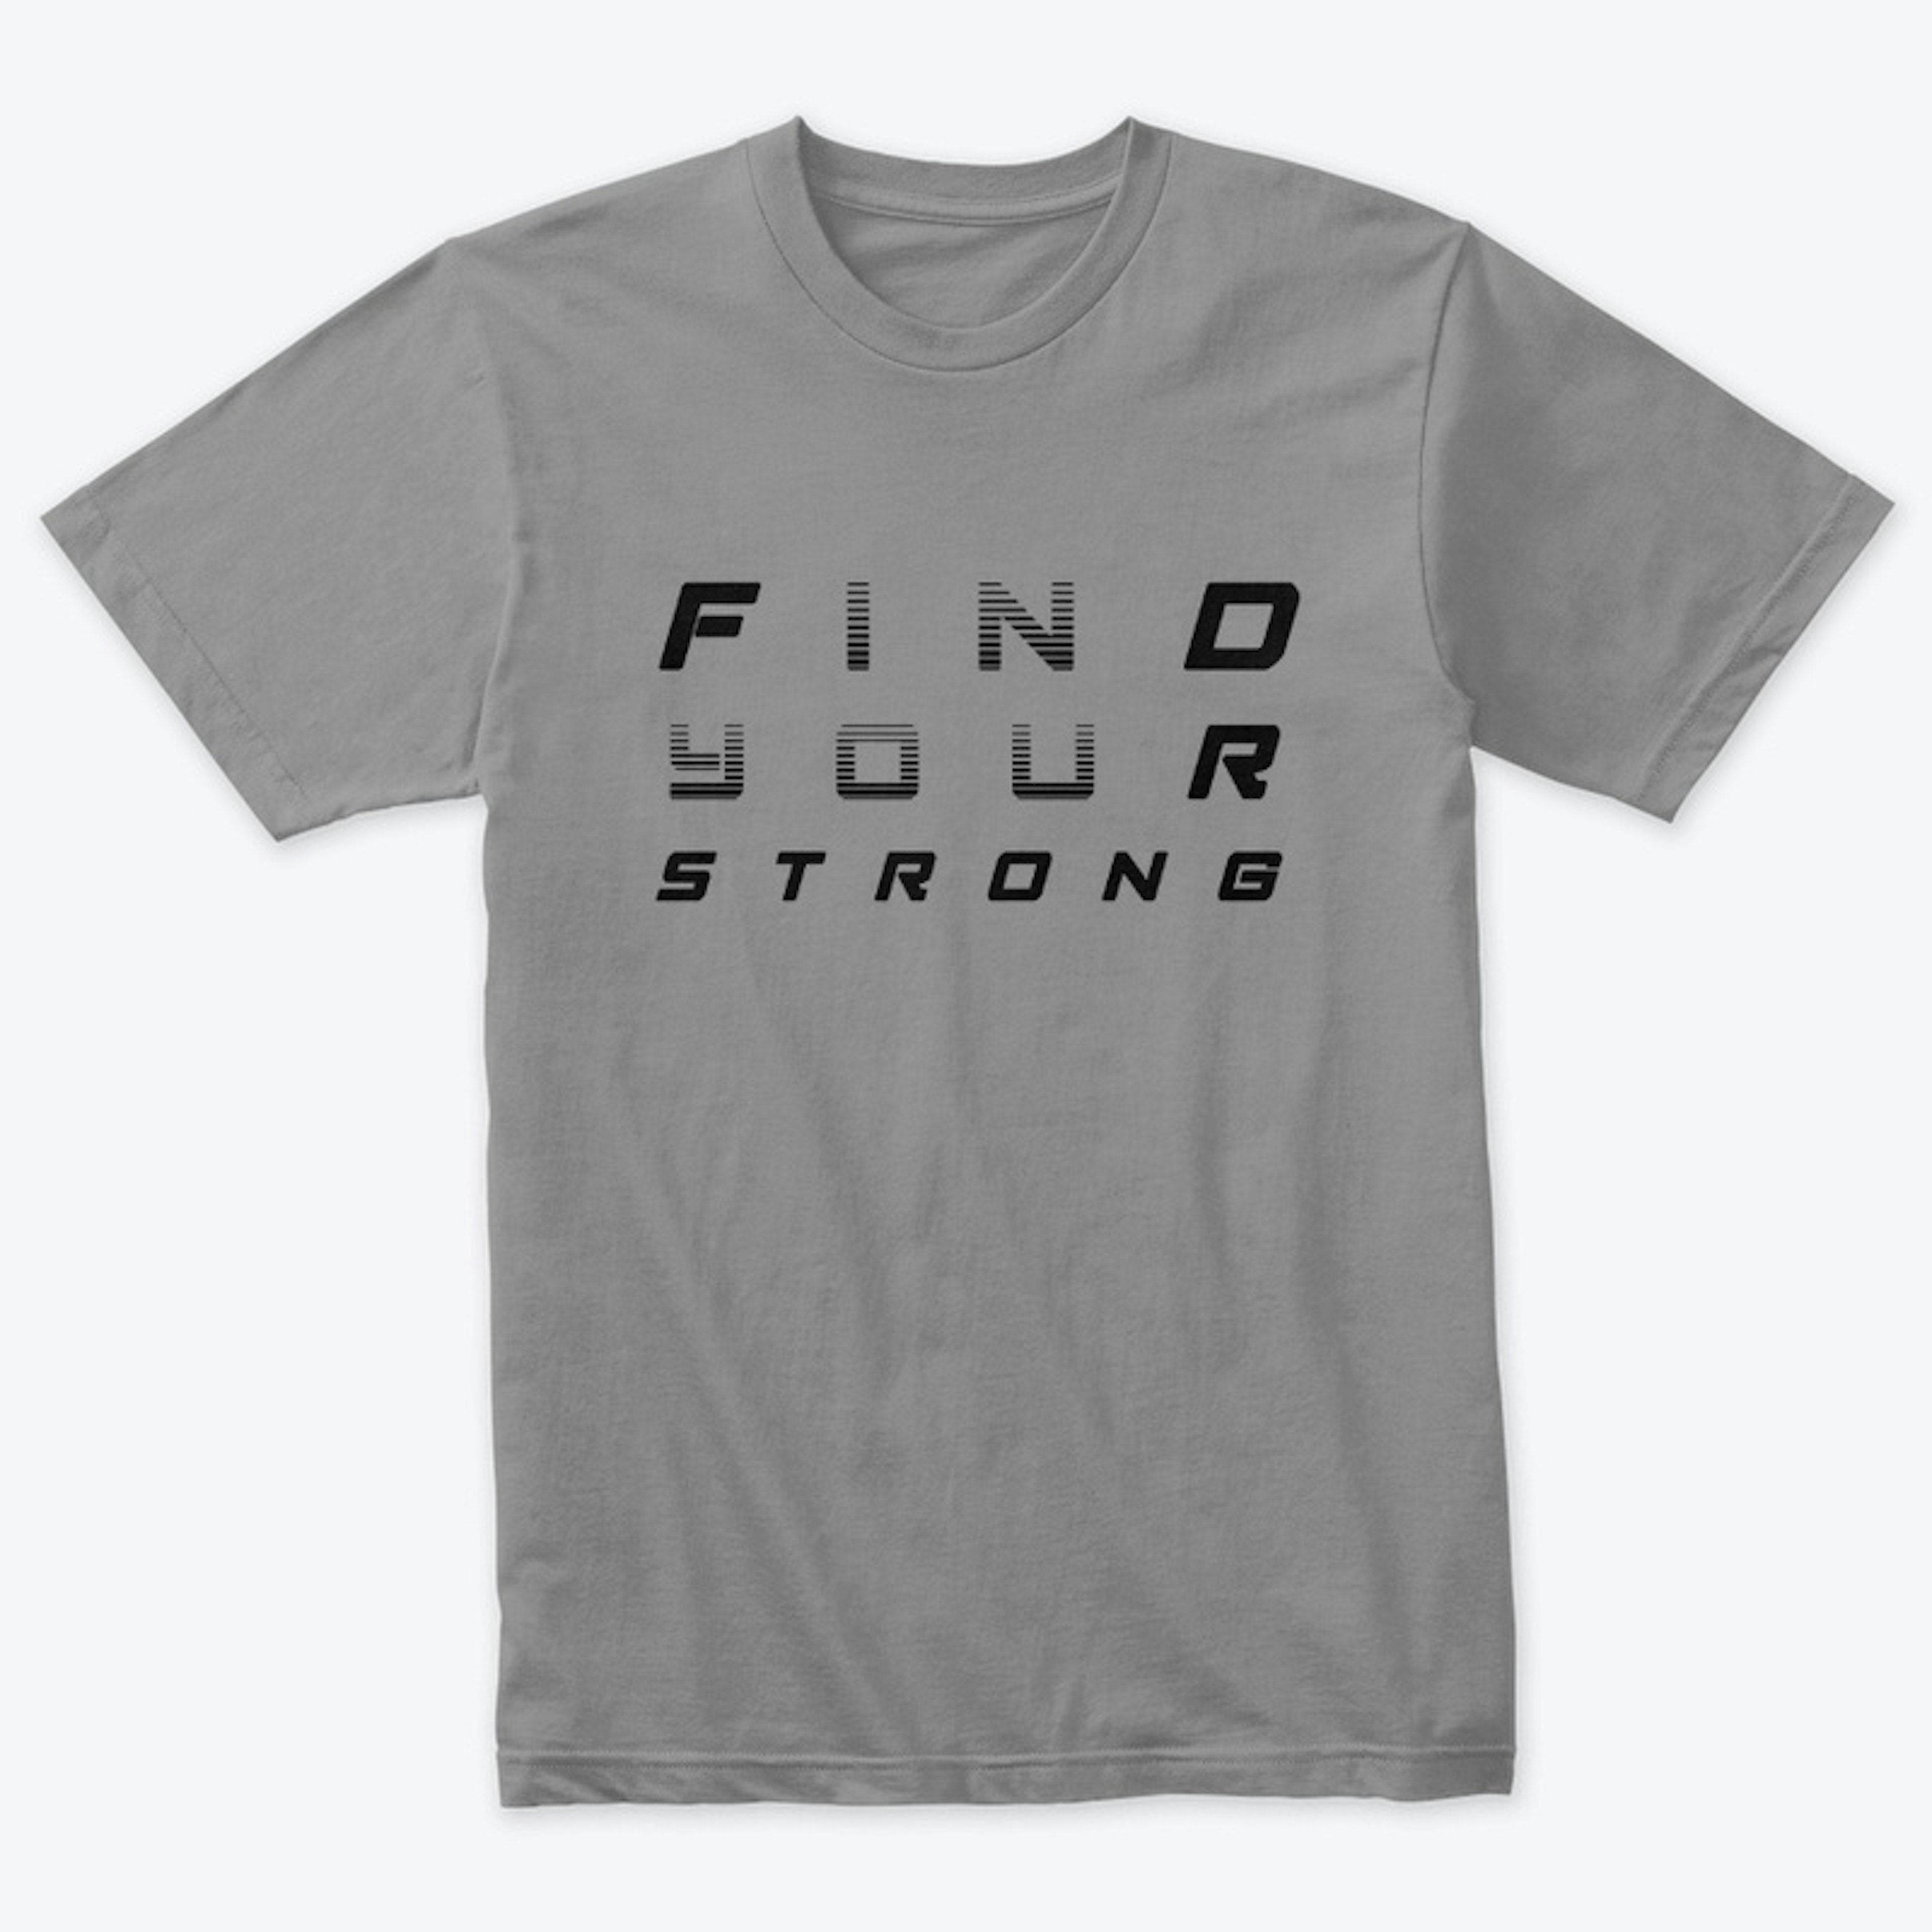 Find Your Strong (black lettering)